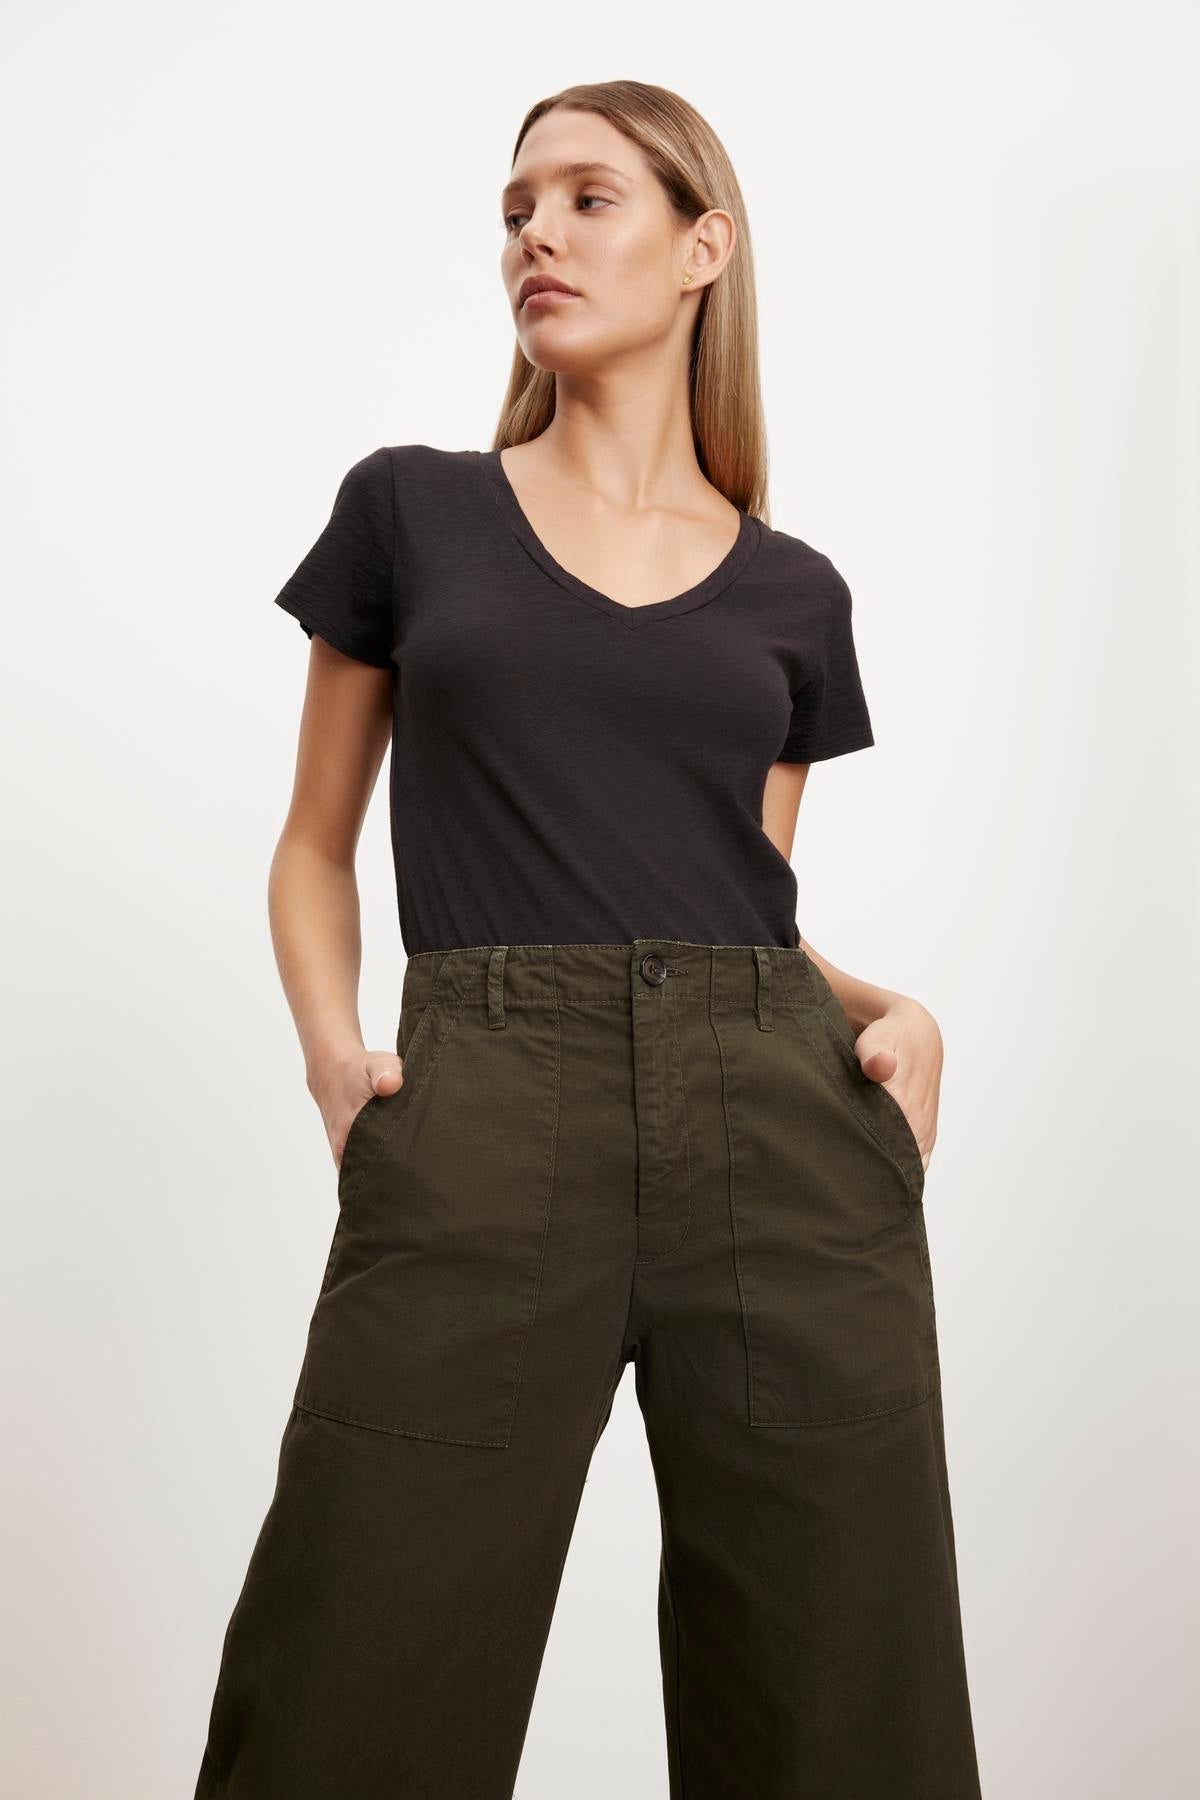 The model is wearing a t-shirt and Velvet by Graham & Spencer MYA COTTON CANVAS PANT.-36320657047745